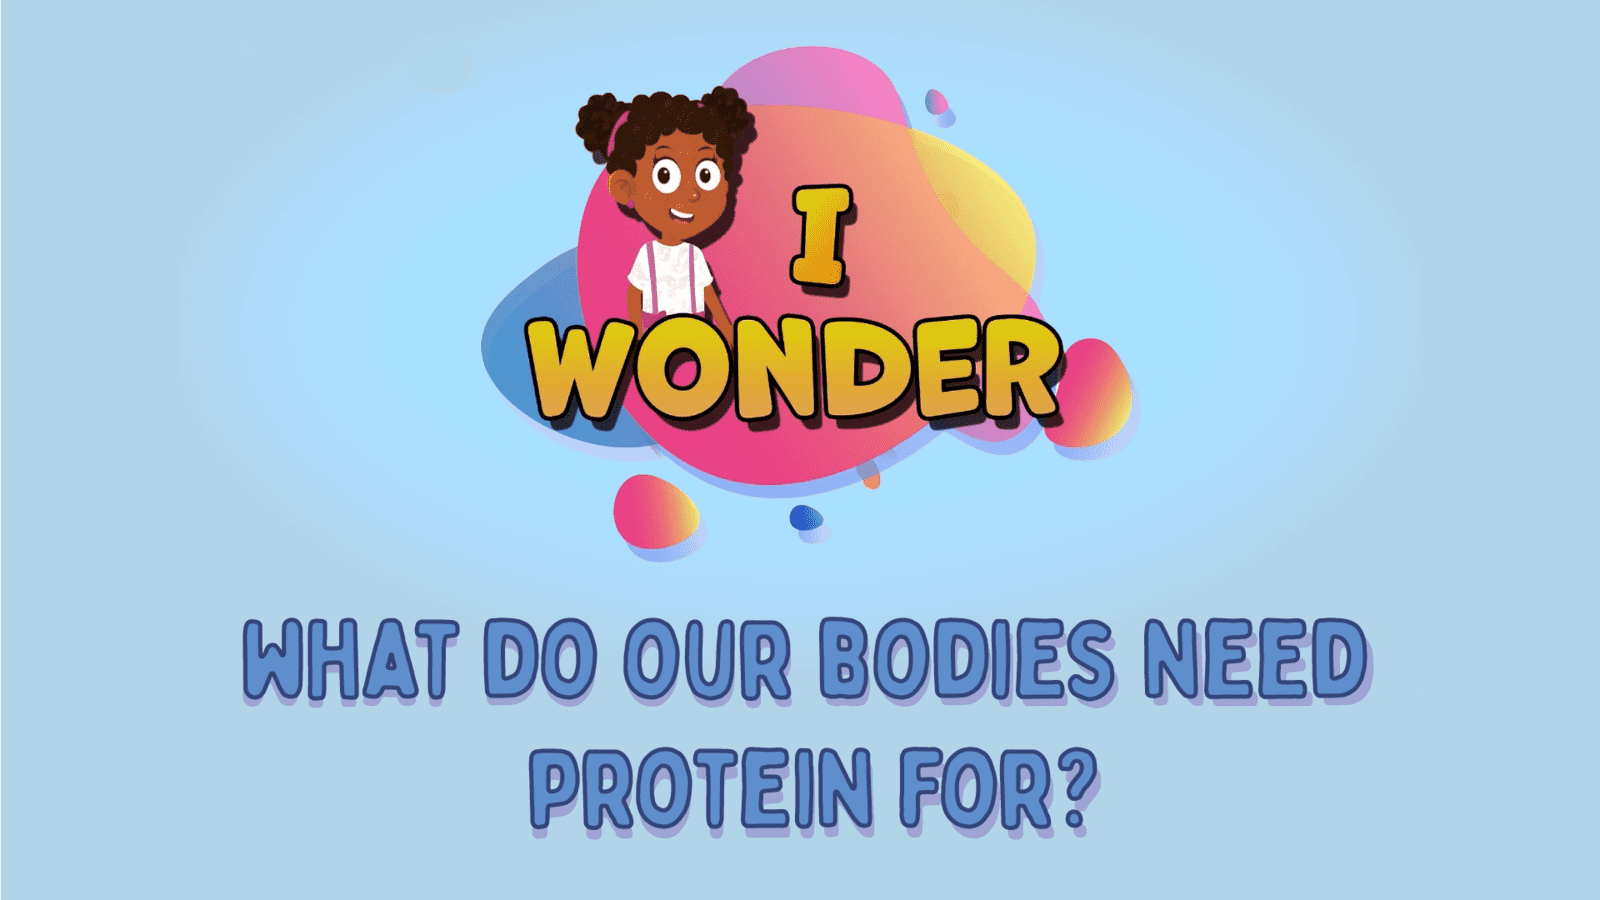 Bodies Need Protein For LearningMole